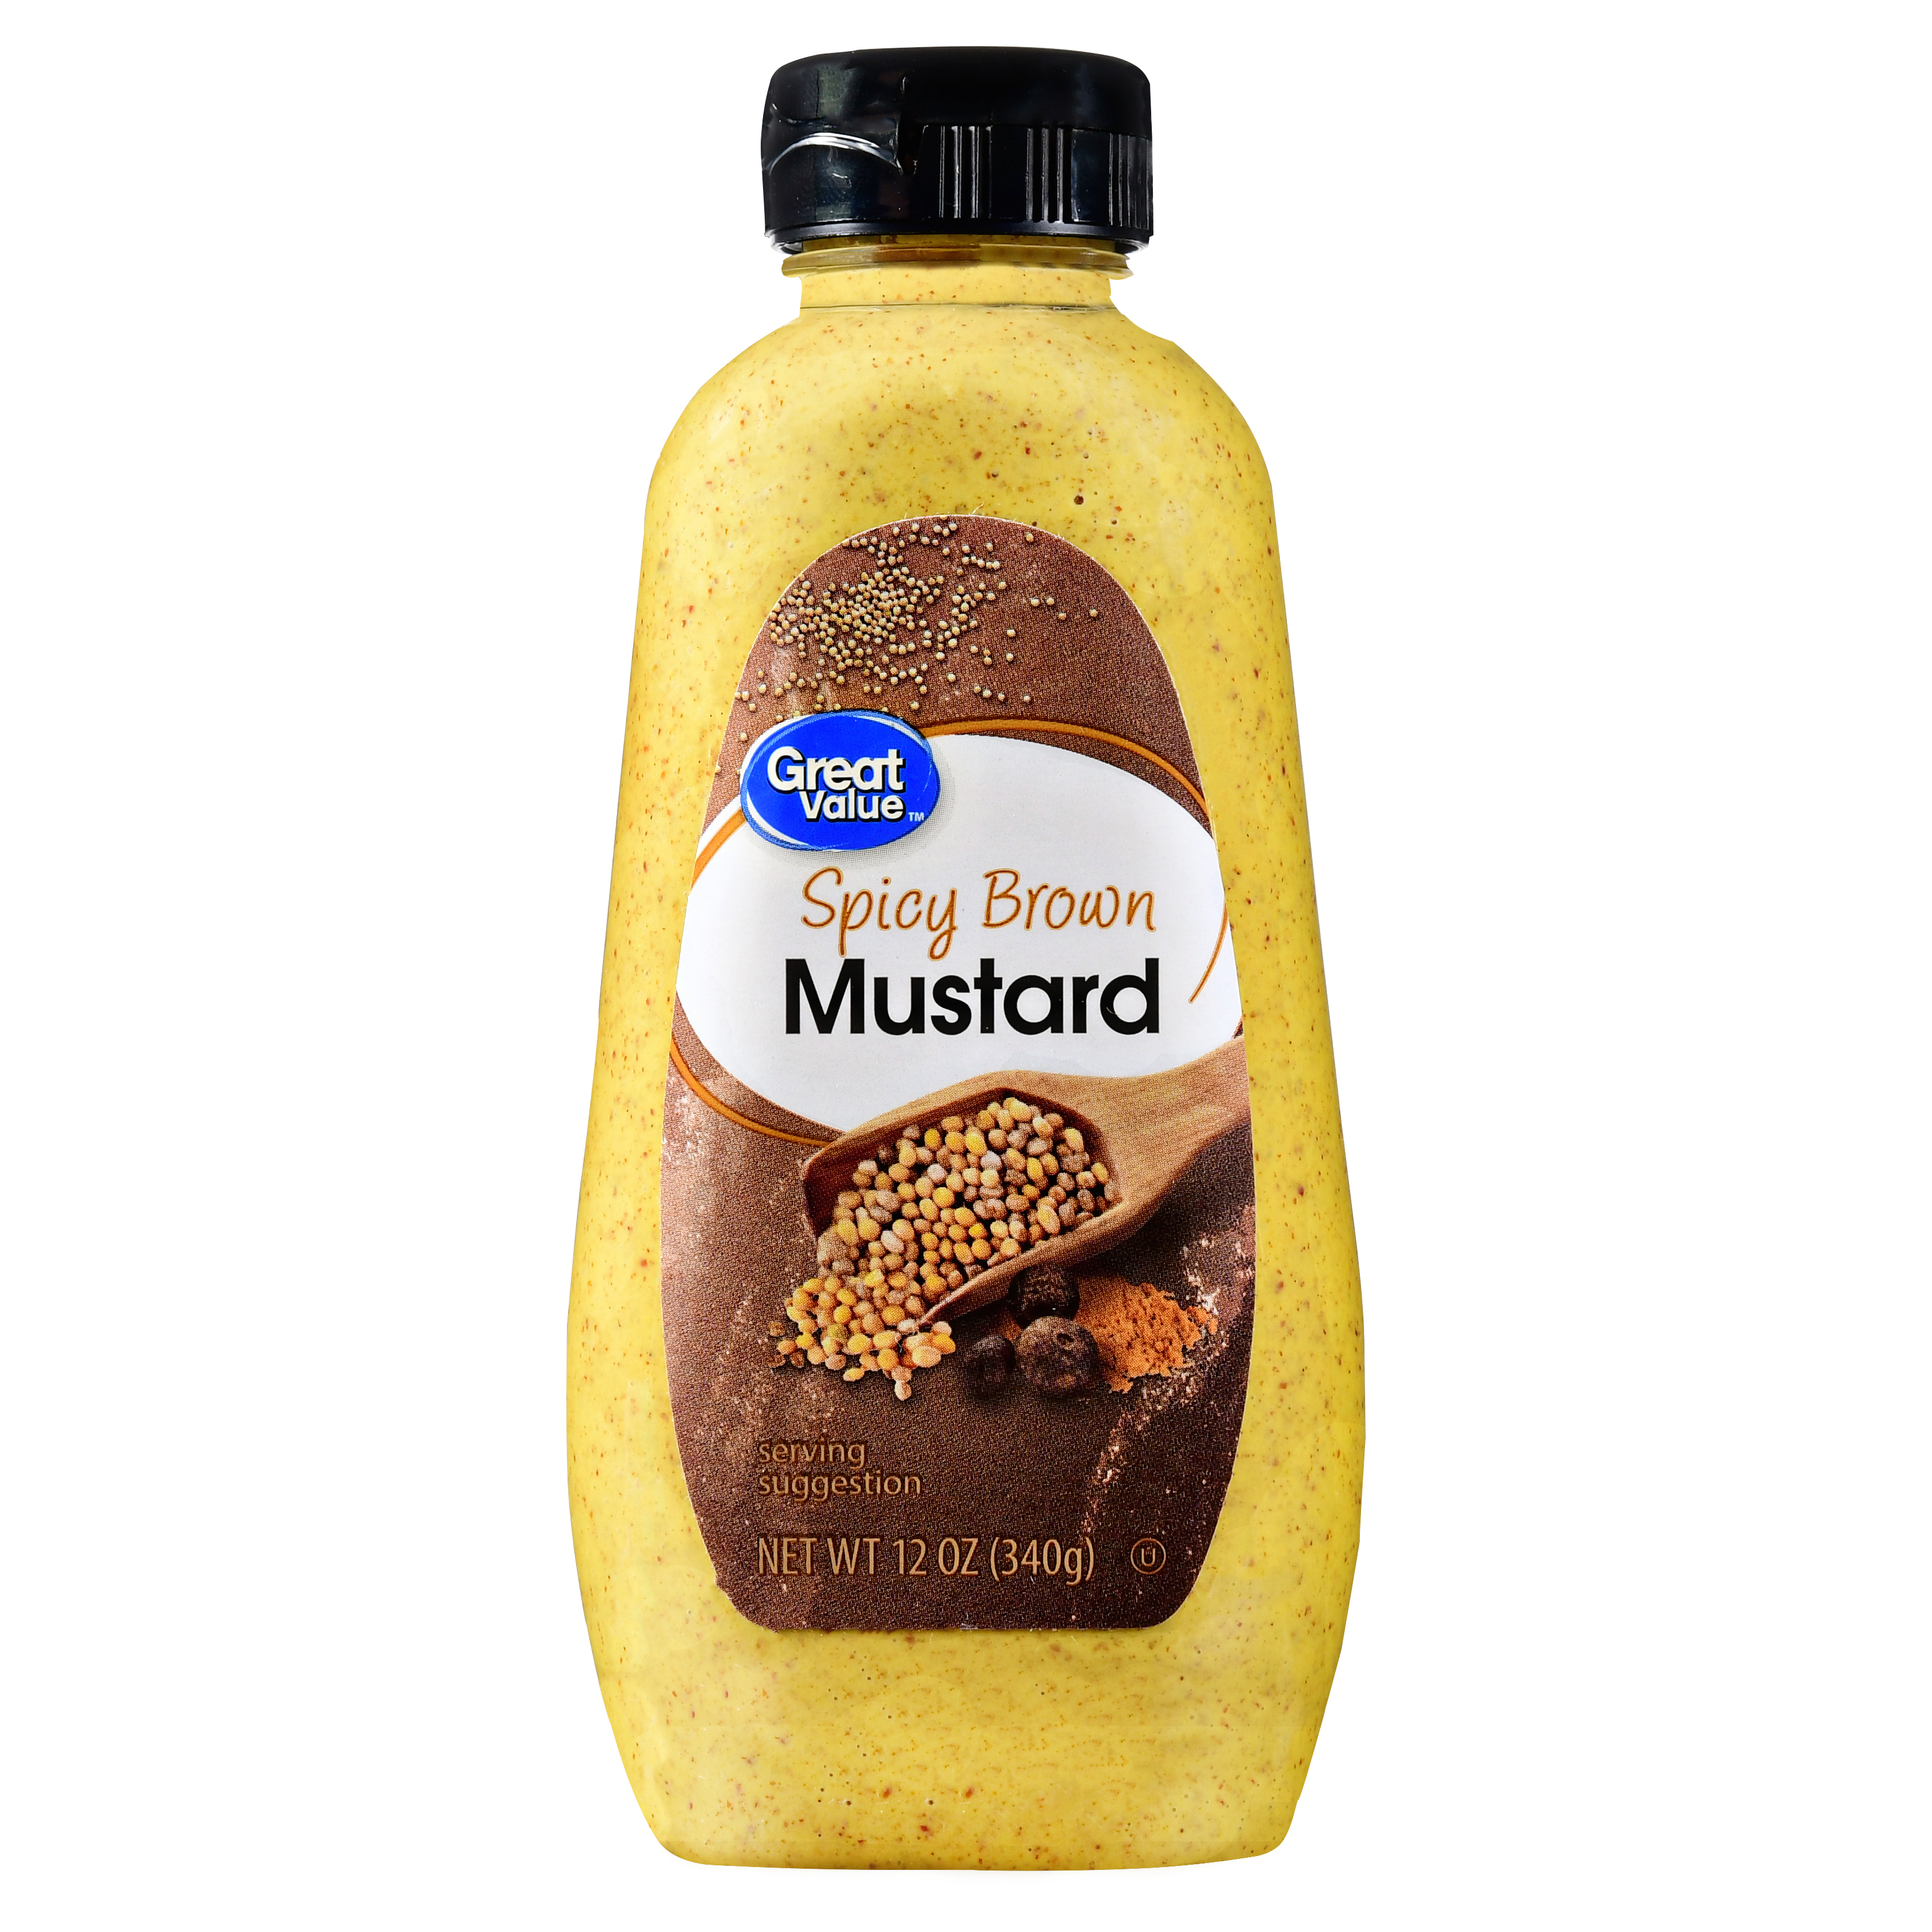 Great Value Spicy Brown Mustard, 12 Oz Image